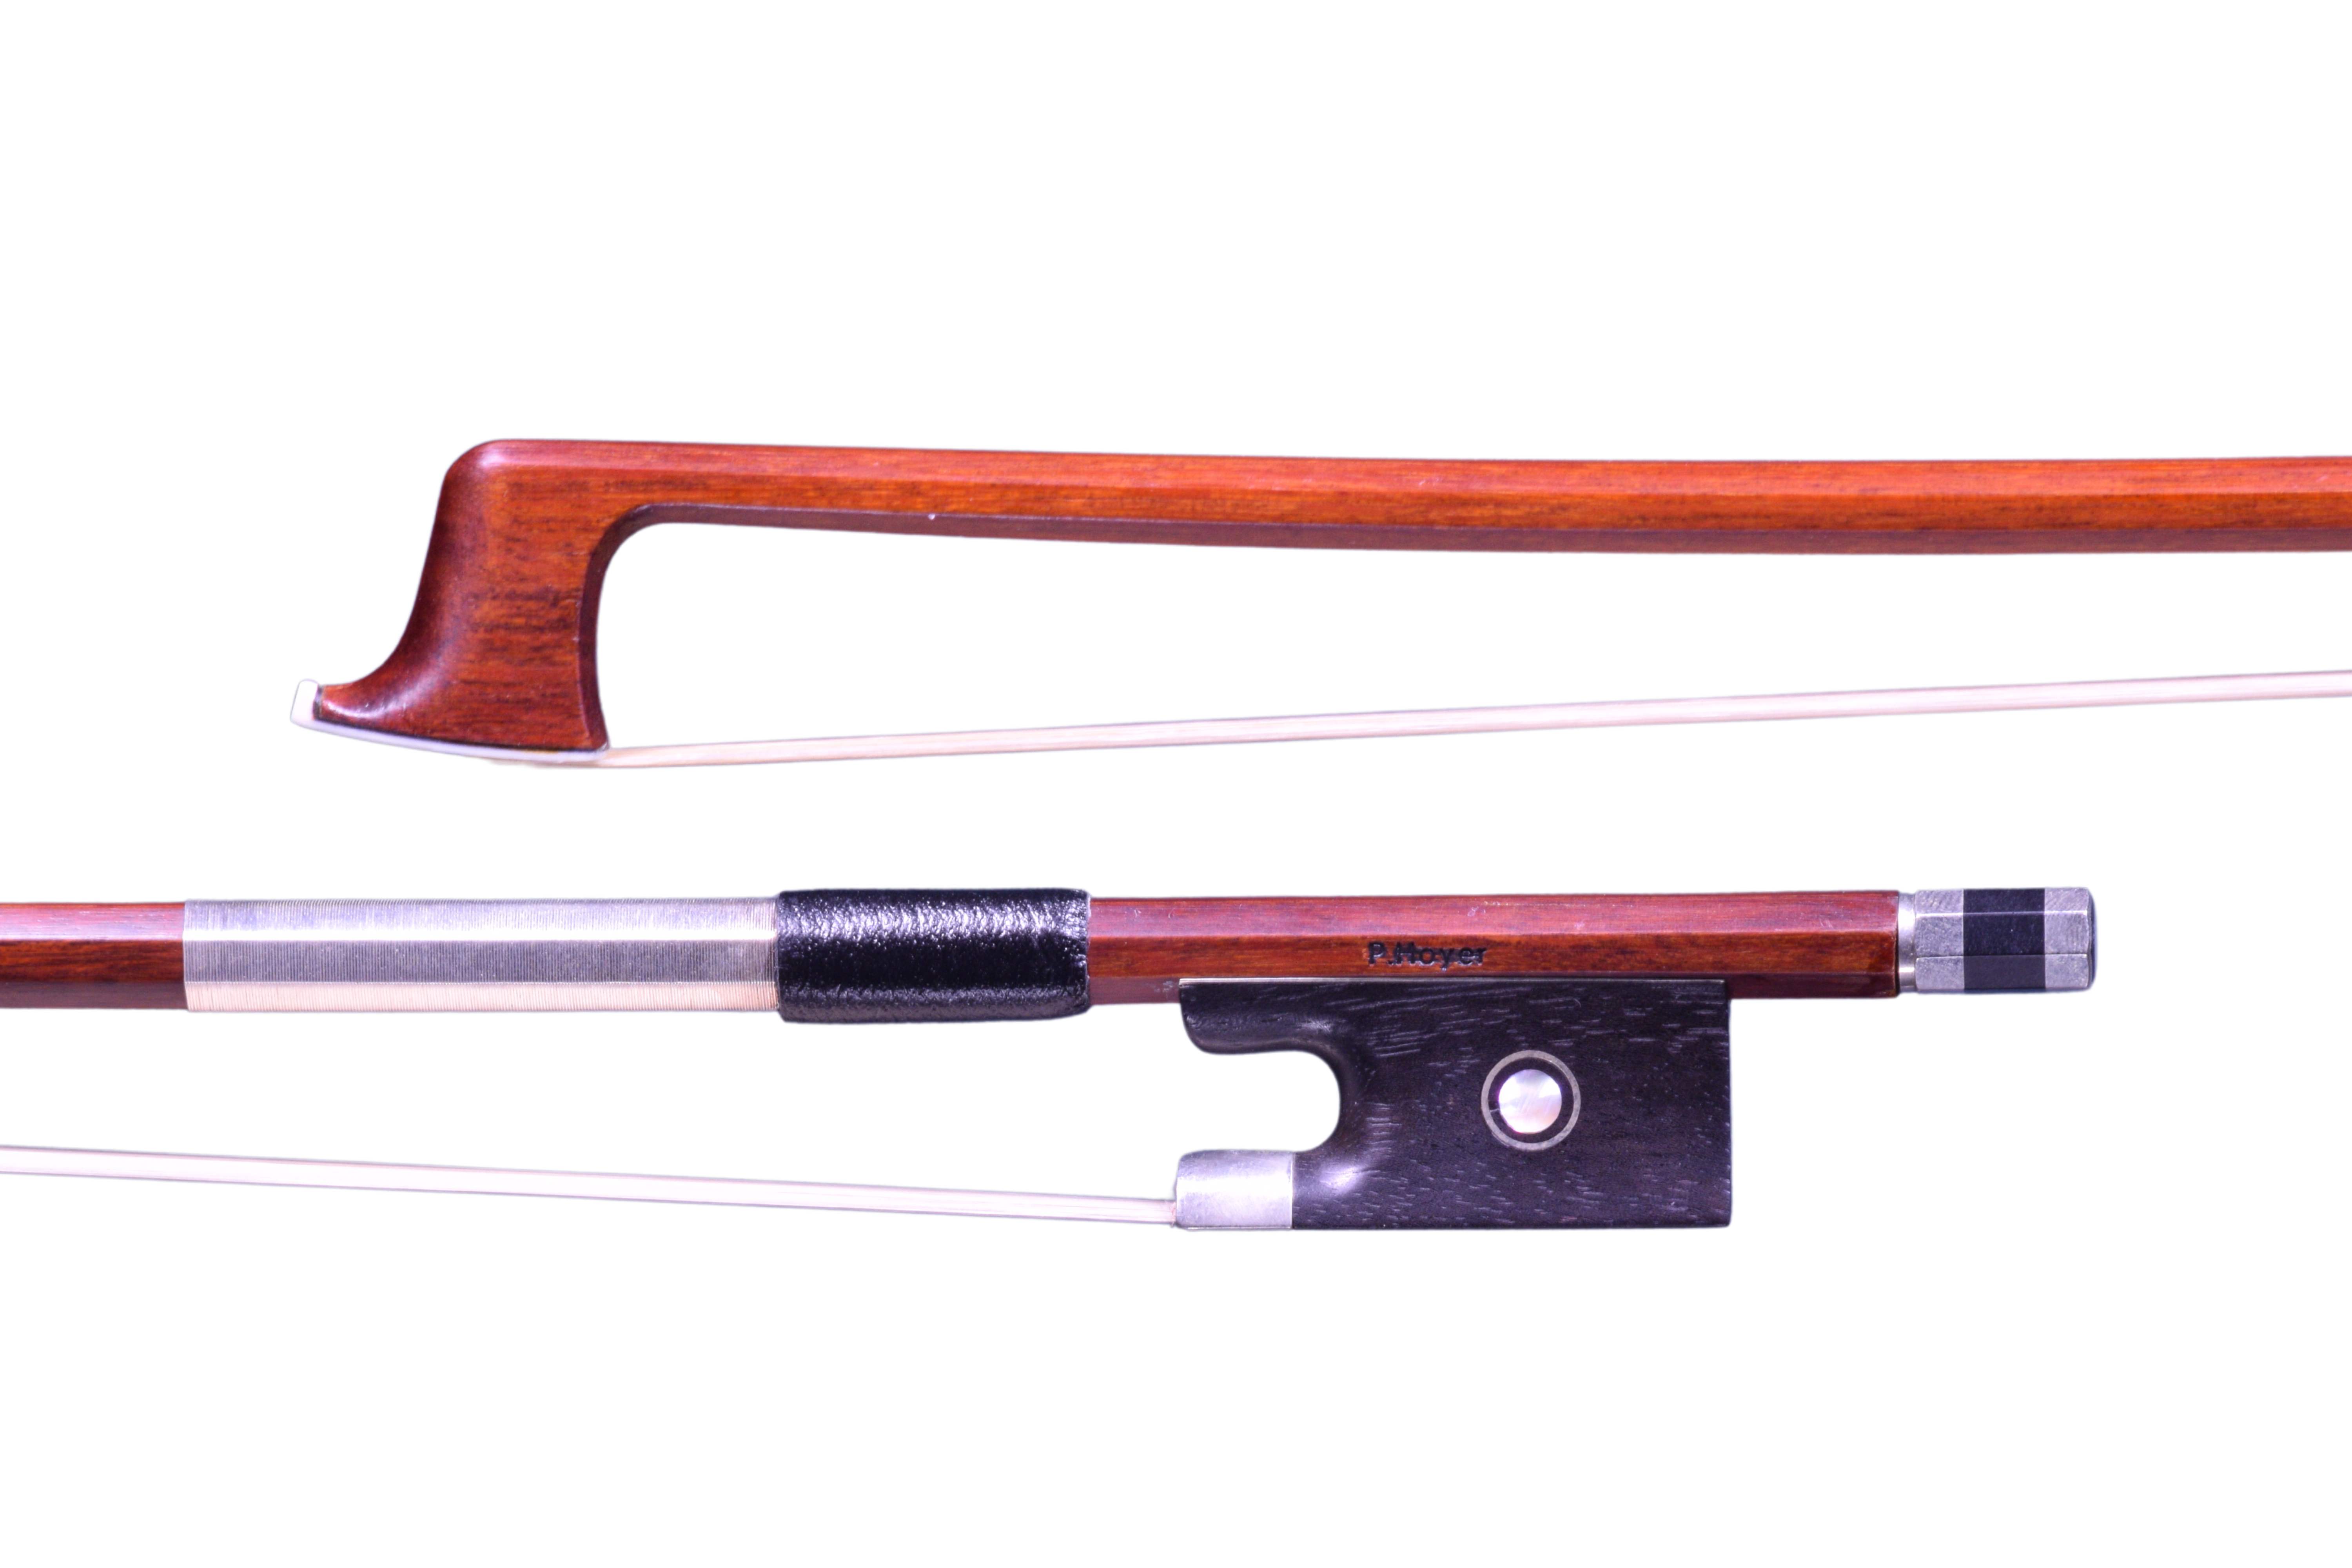 P. Hoyer violin bow frog and head